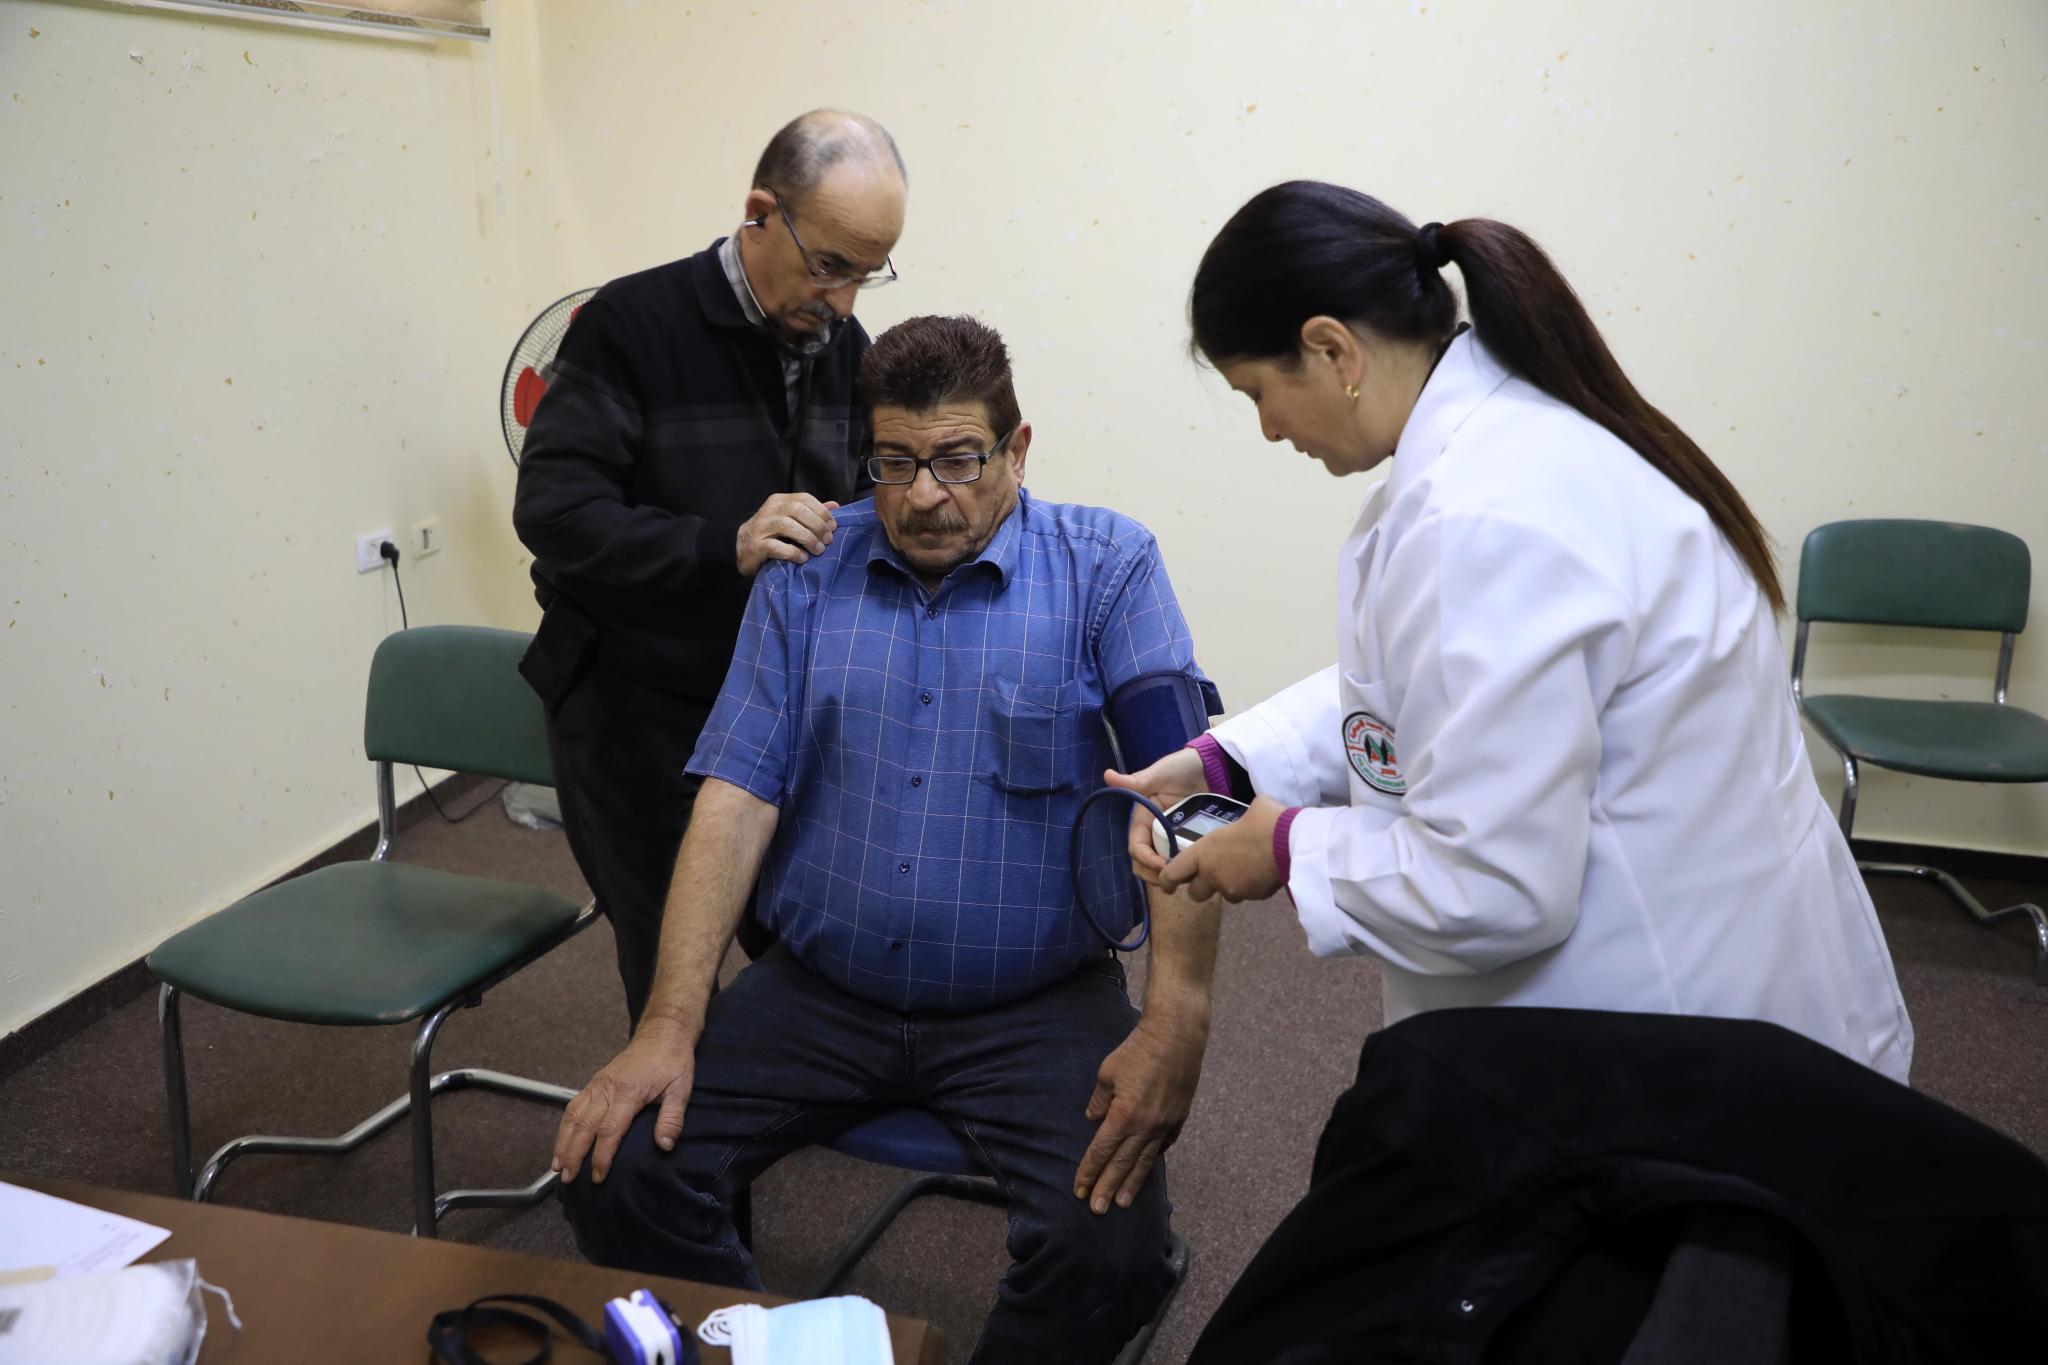 The Arab American University Holds a Medical Day in the Town of Seilat Al-Dhahir